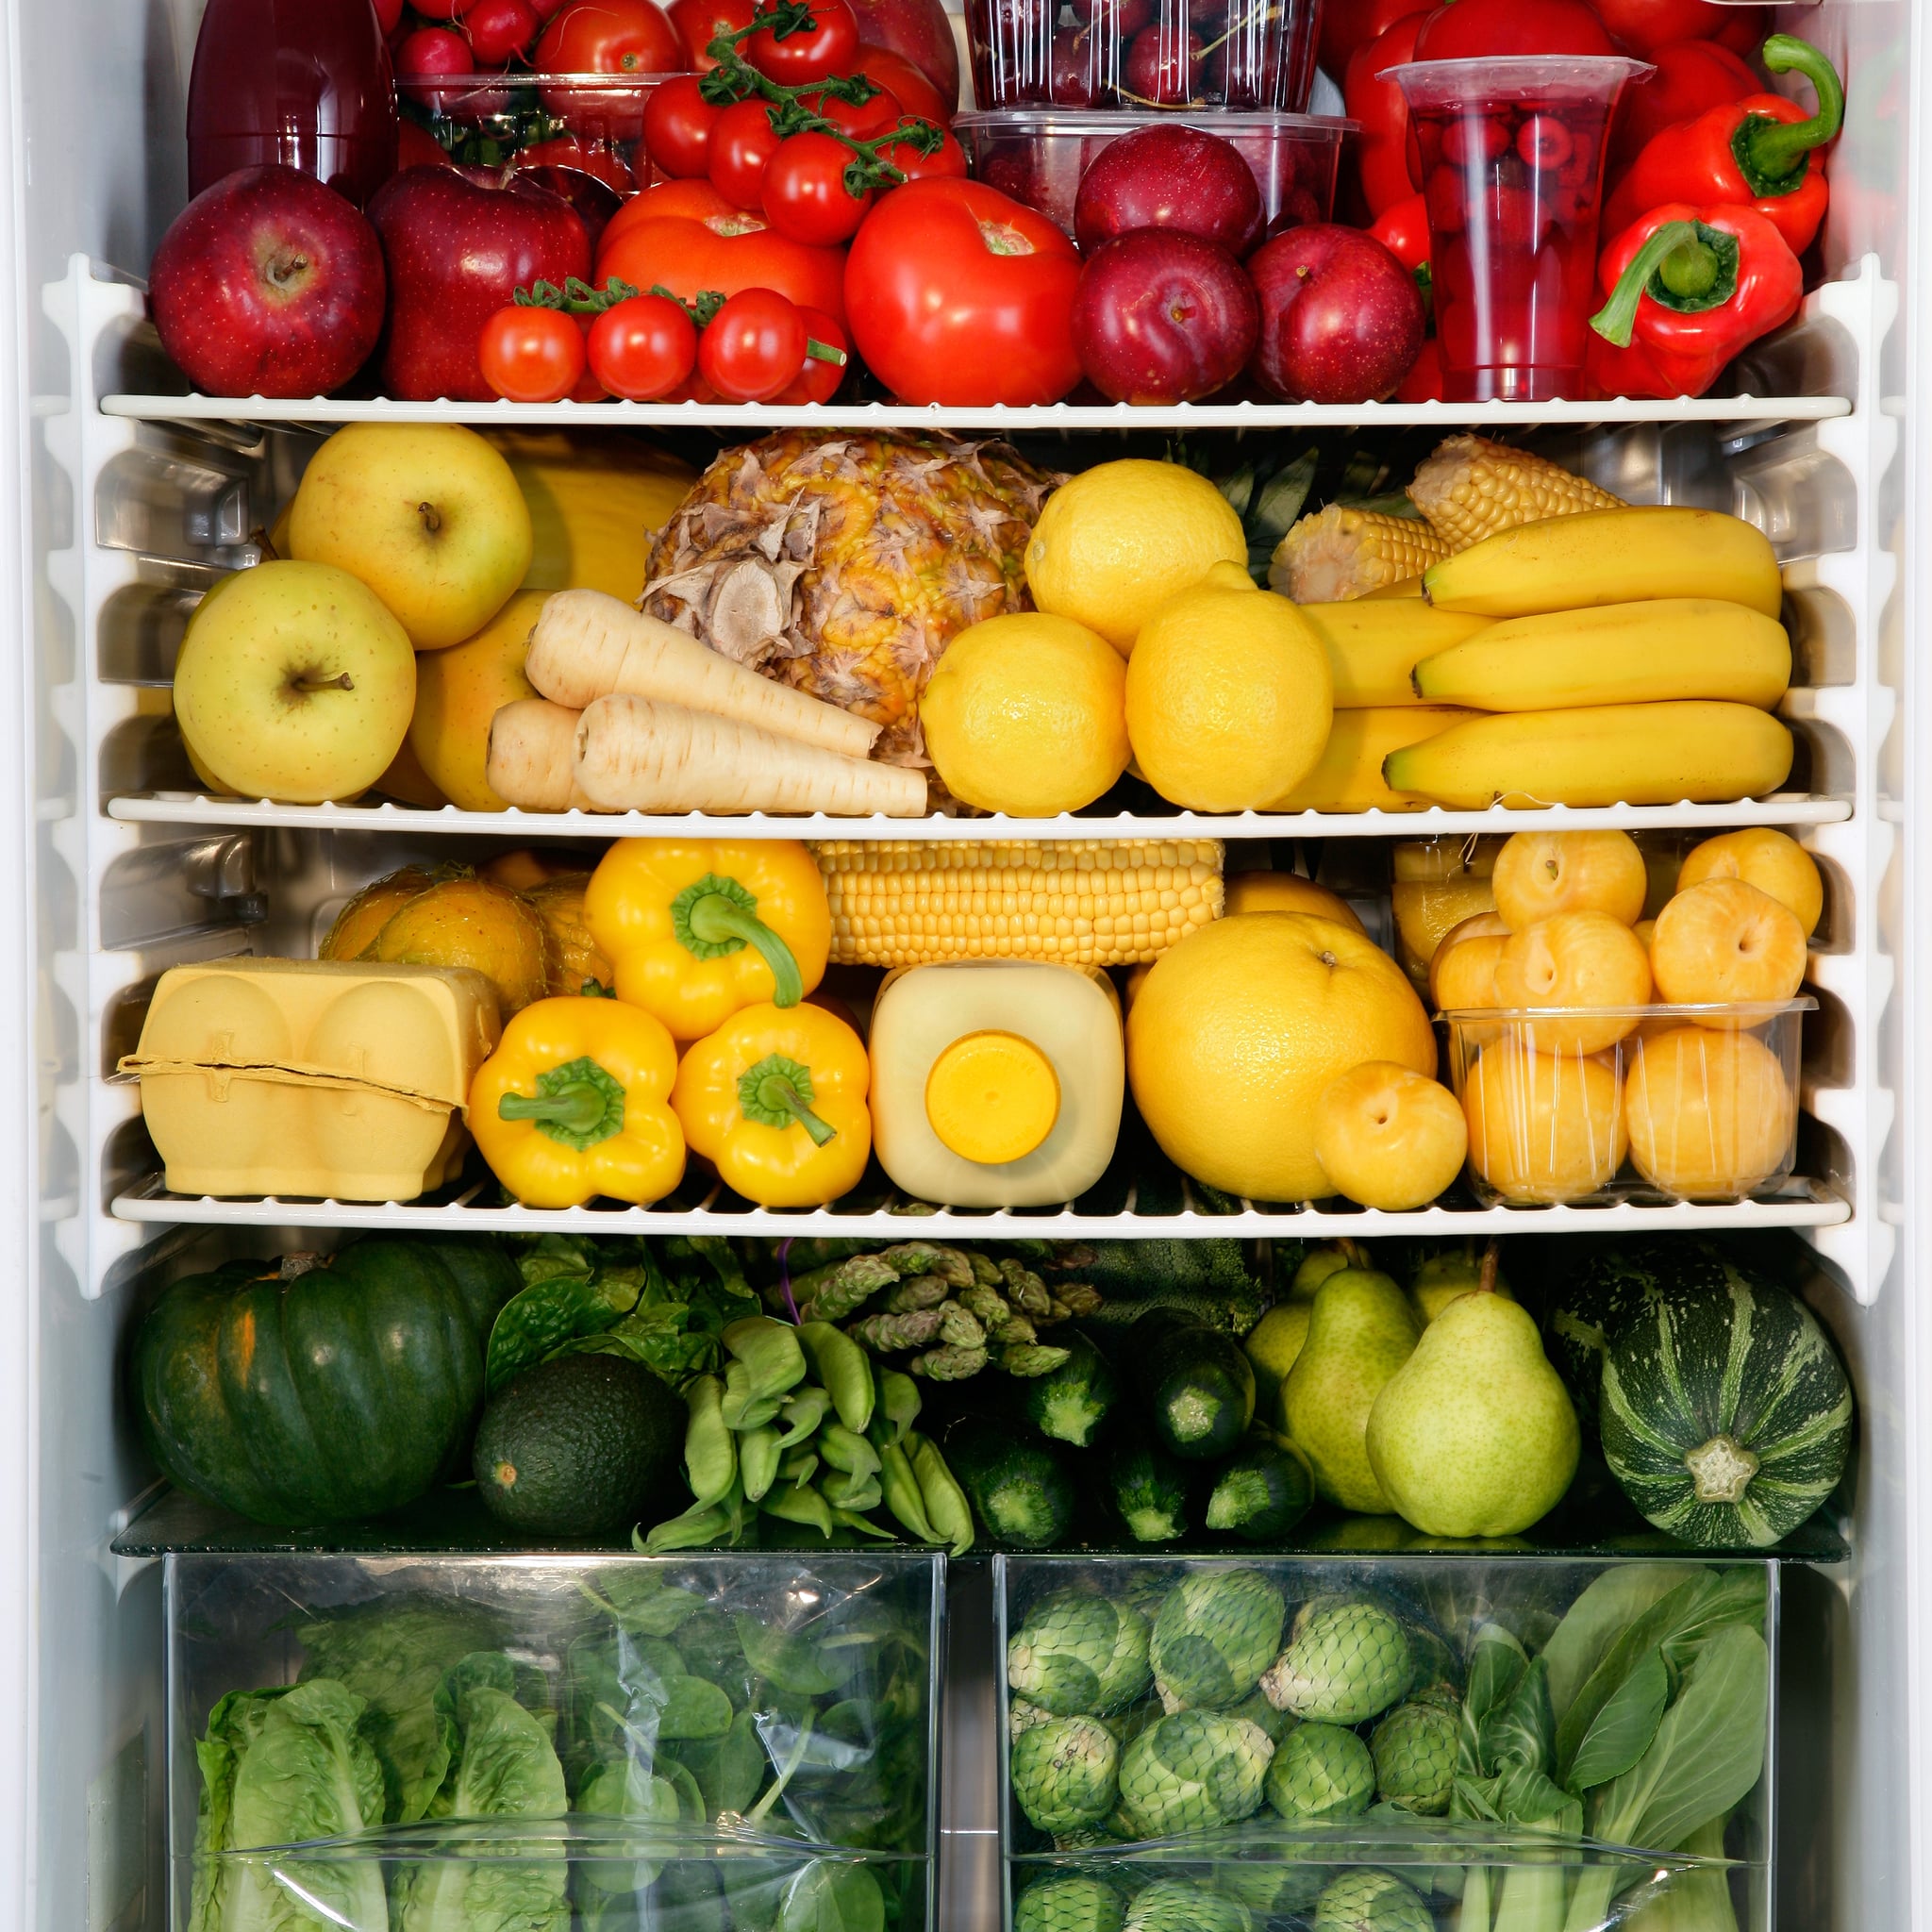 How Long Does Food Really Last in the Fridge?